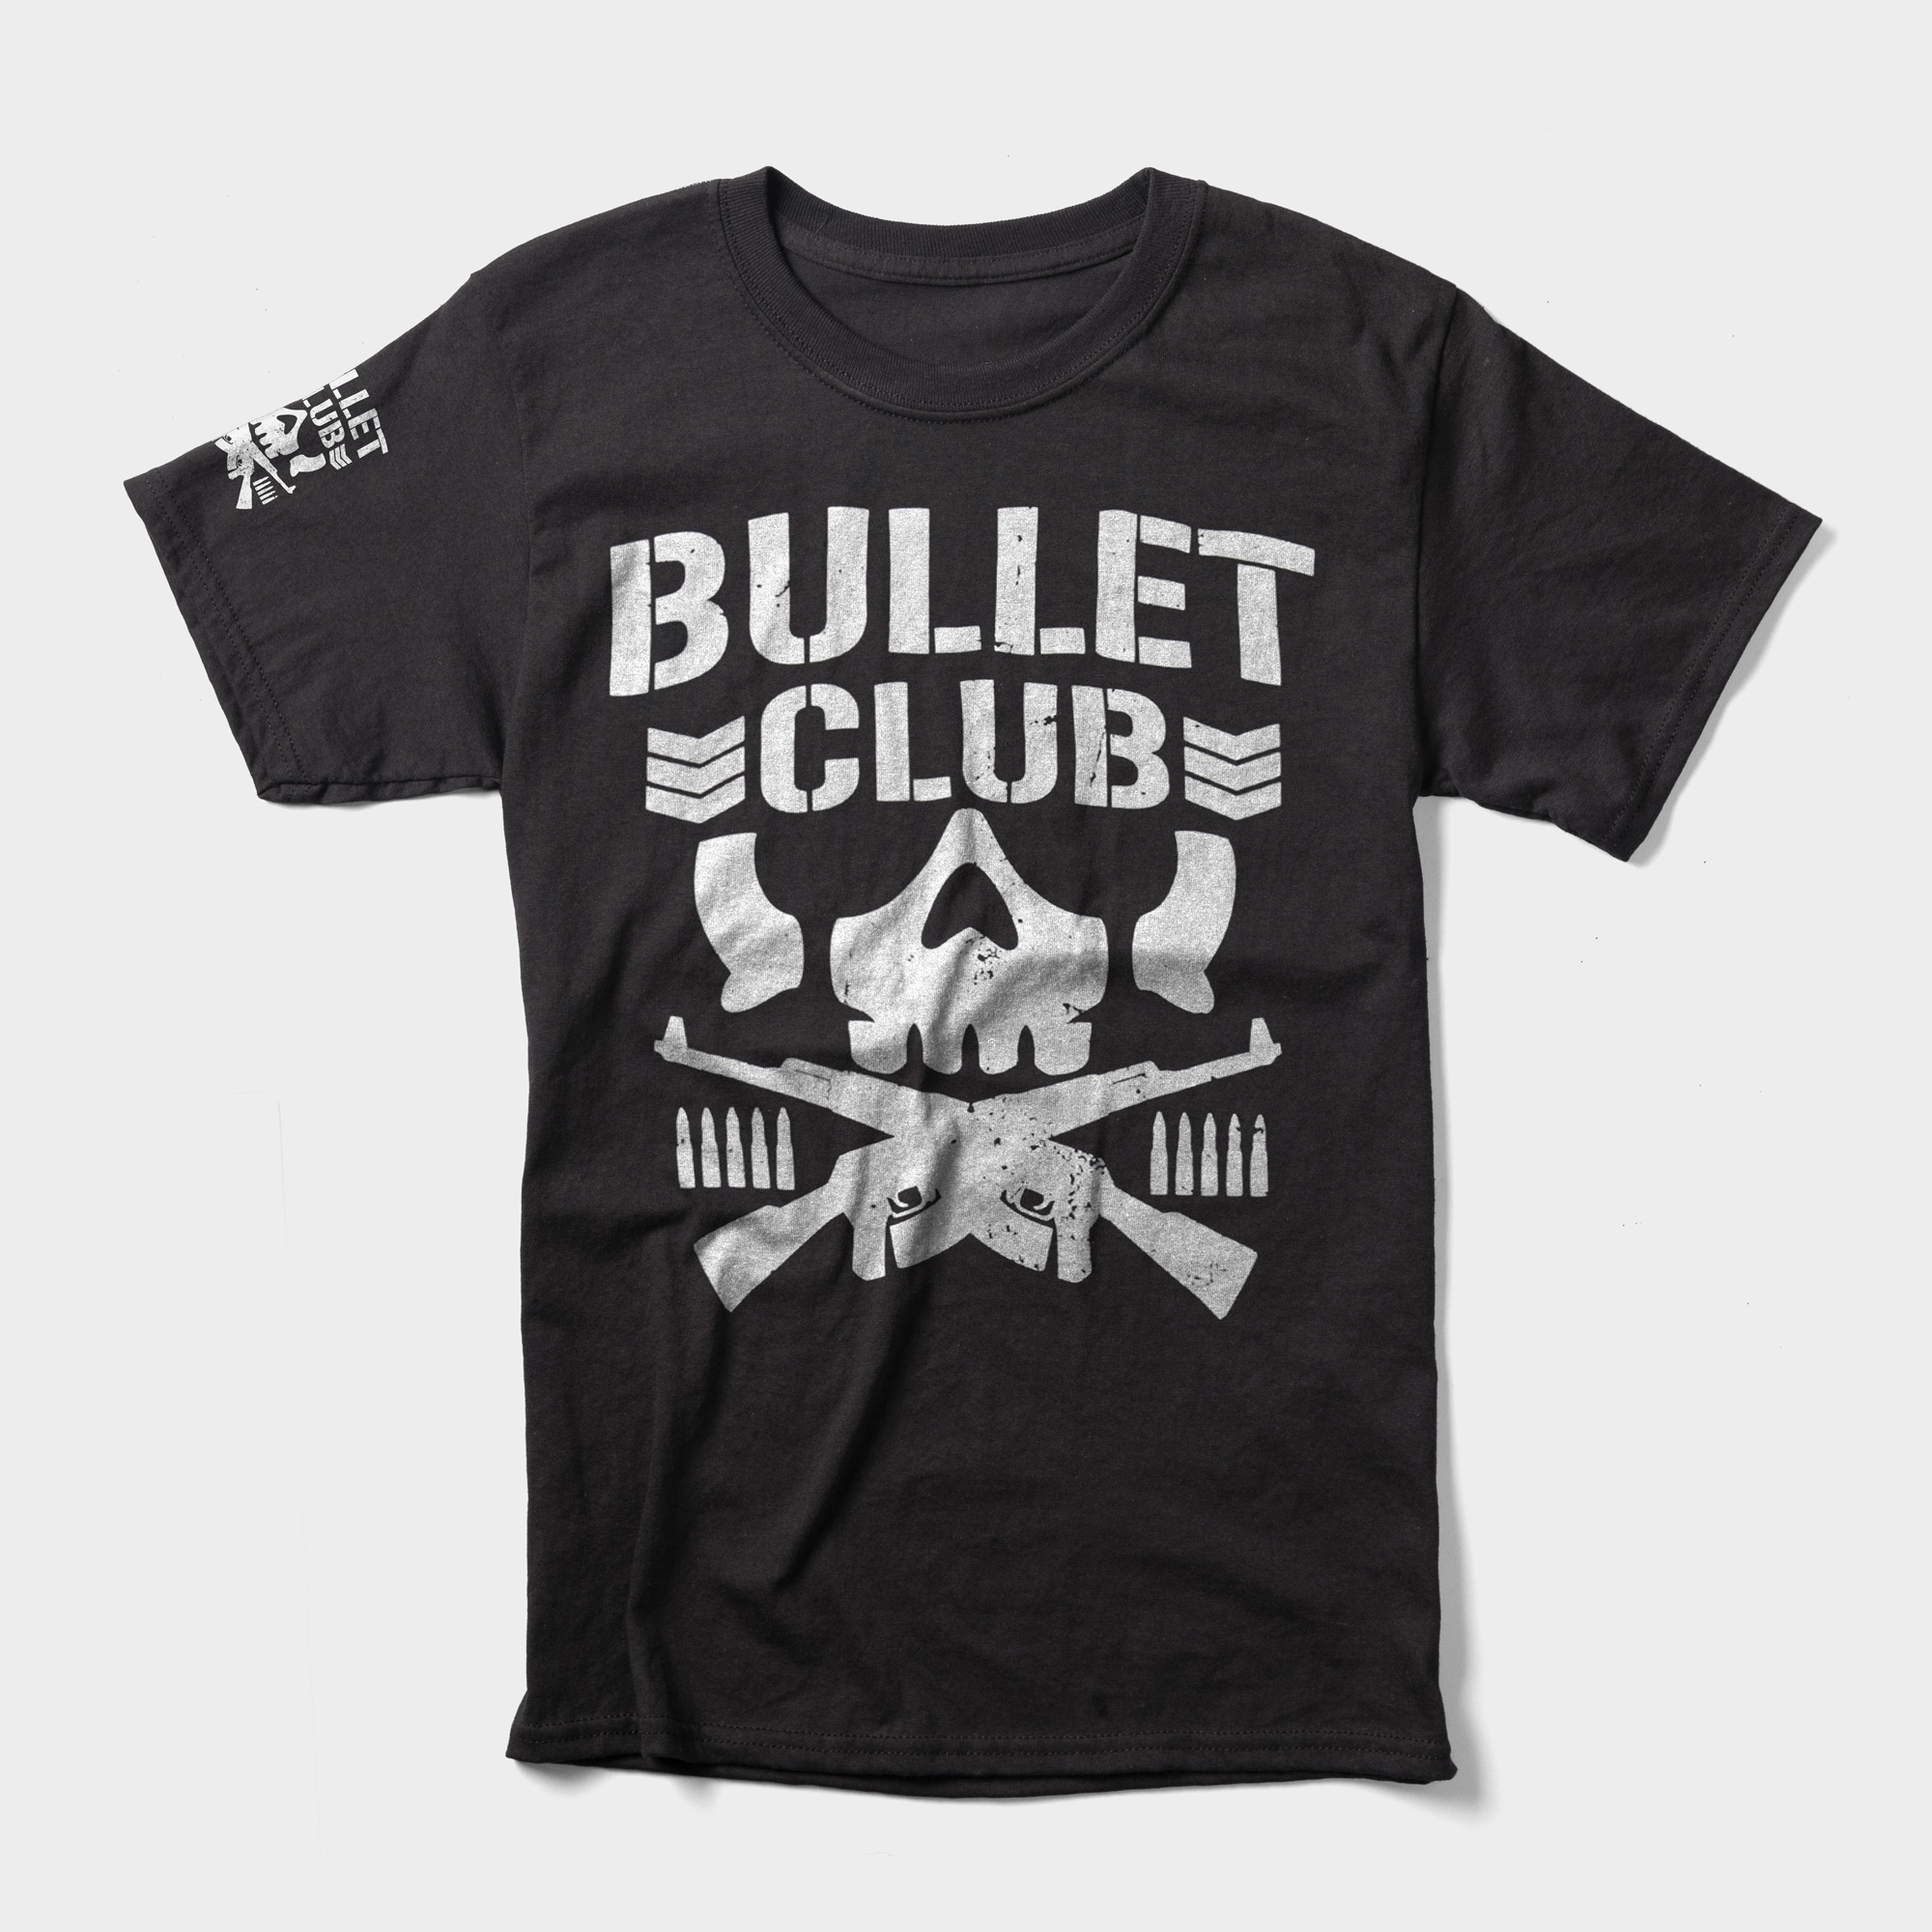 Bullet Club's design is as prolific as their faction and features a skull with two guns and bullets beneath the words "Bullet Club." 